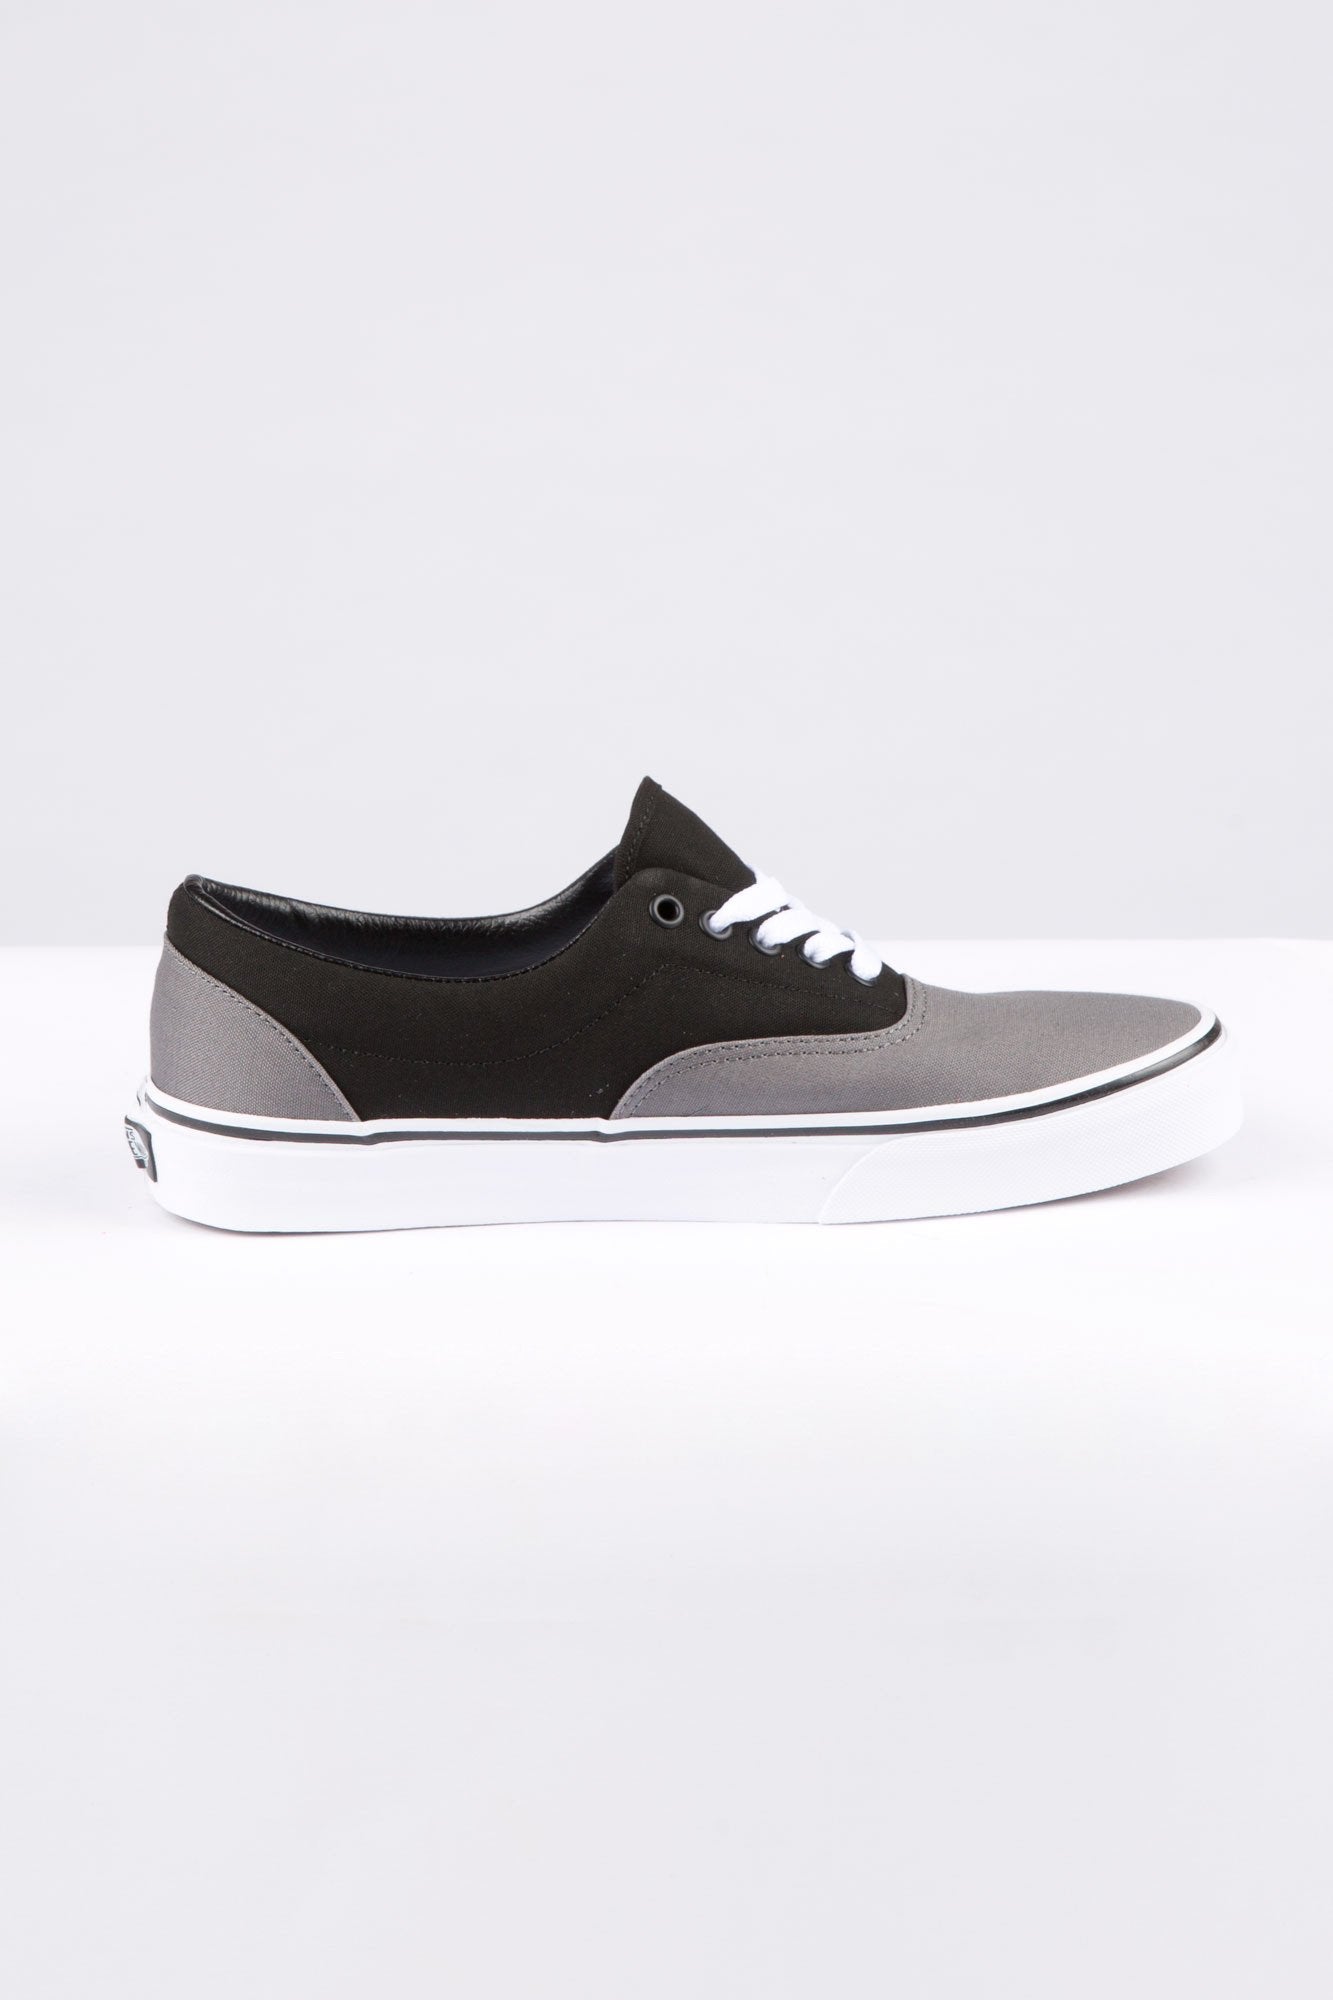 vans shoes for guys